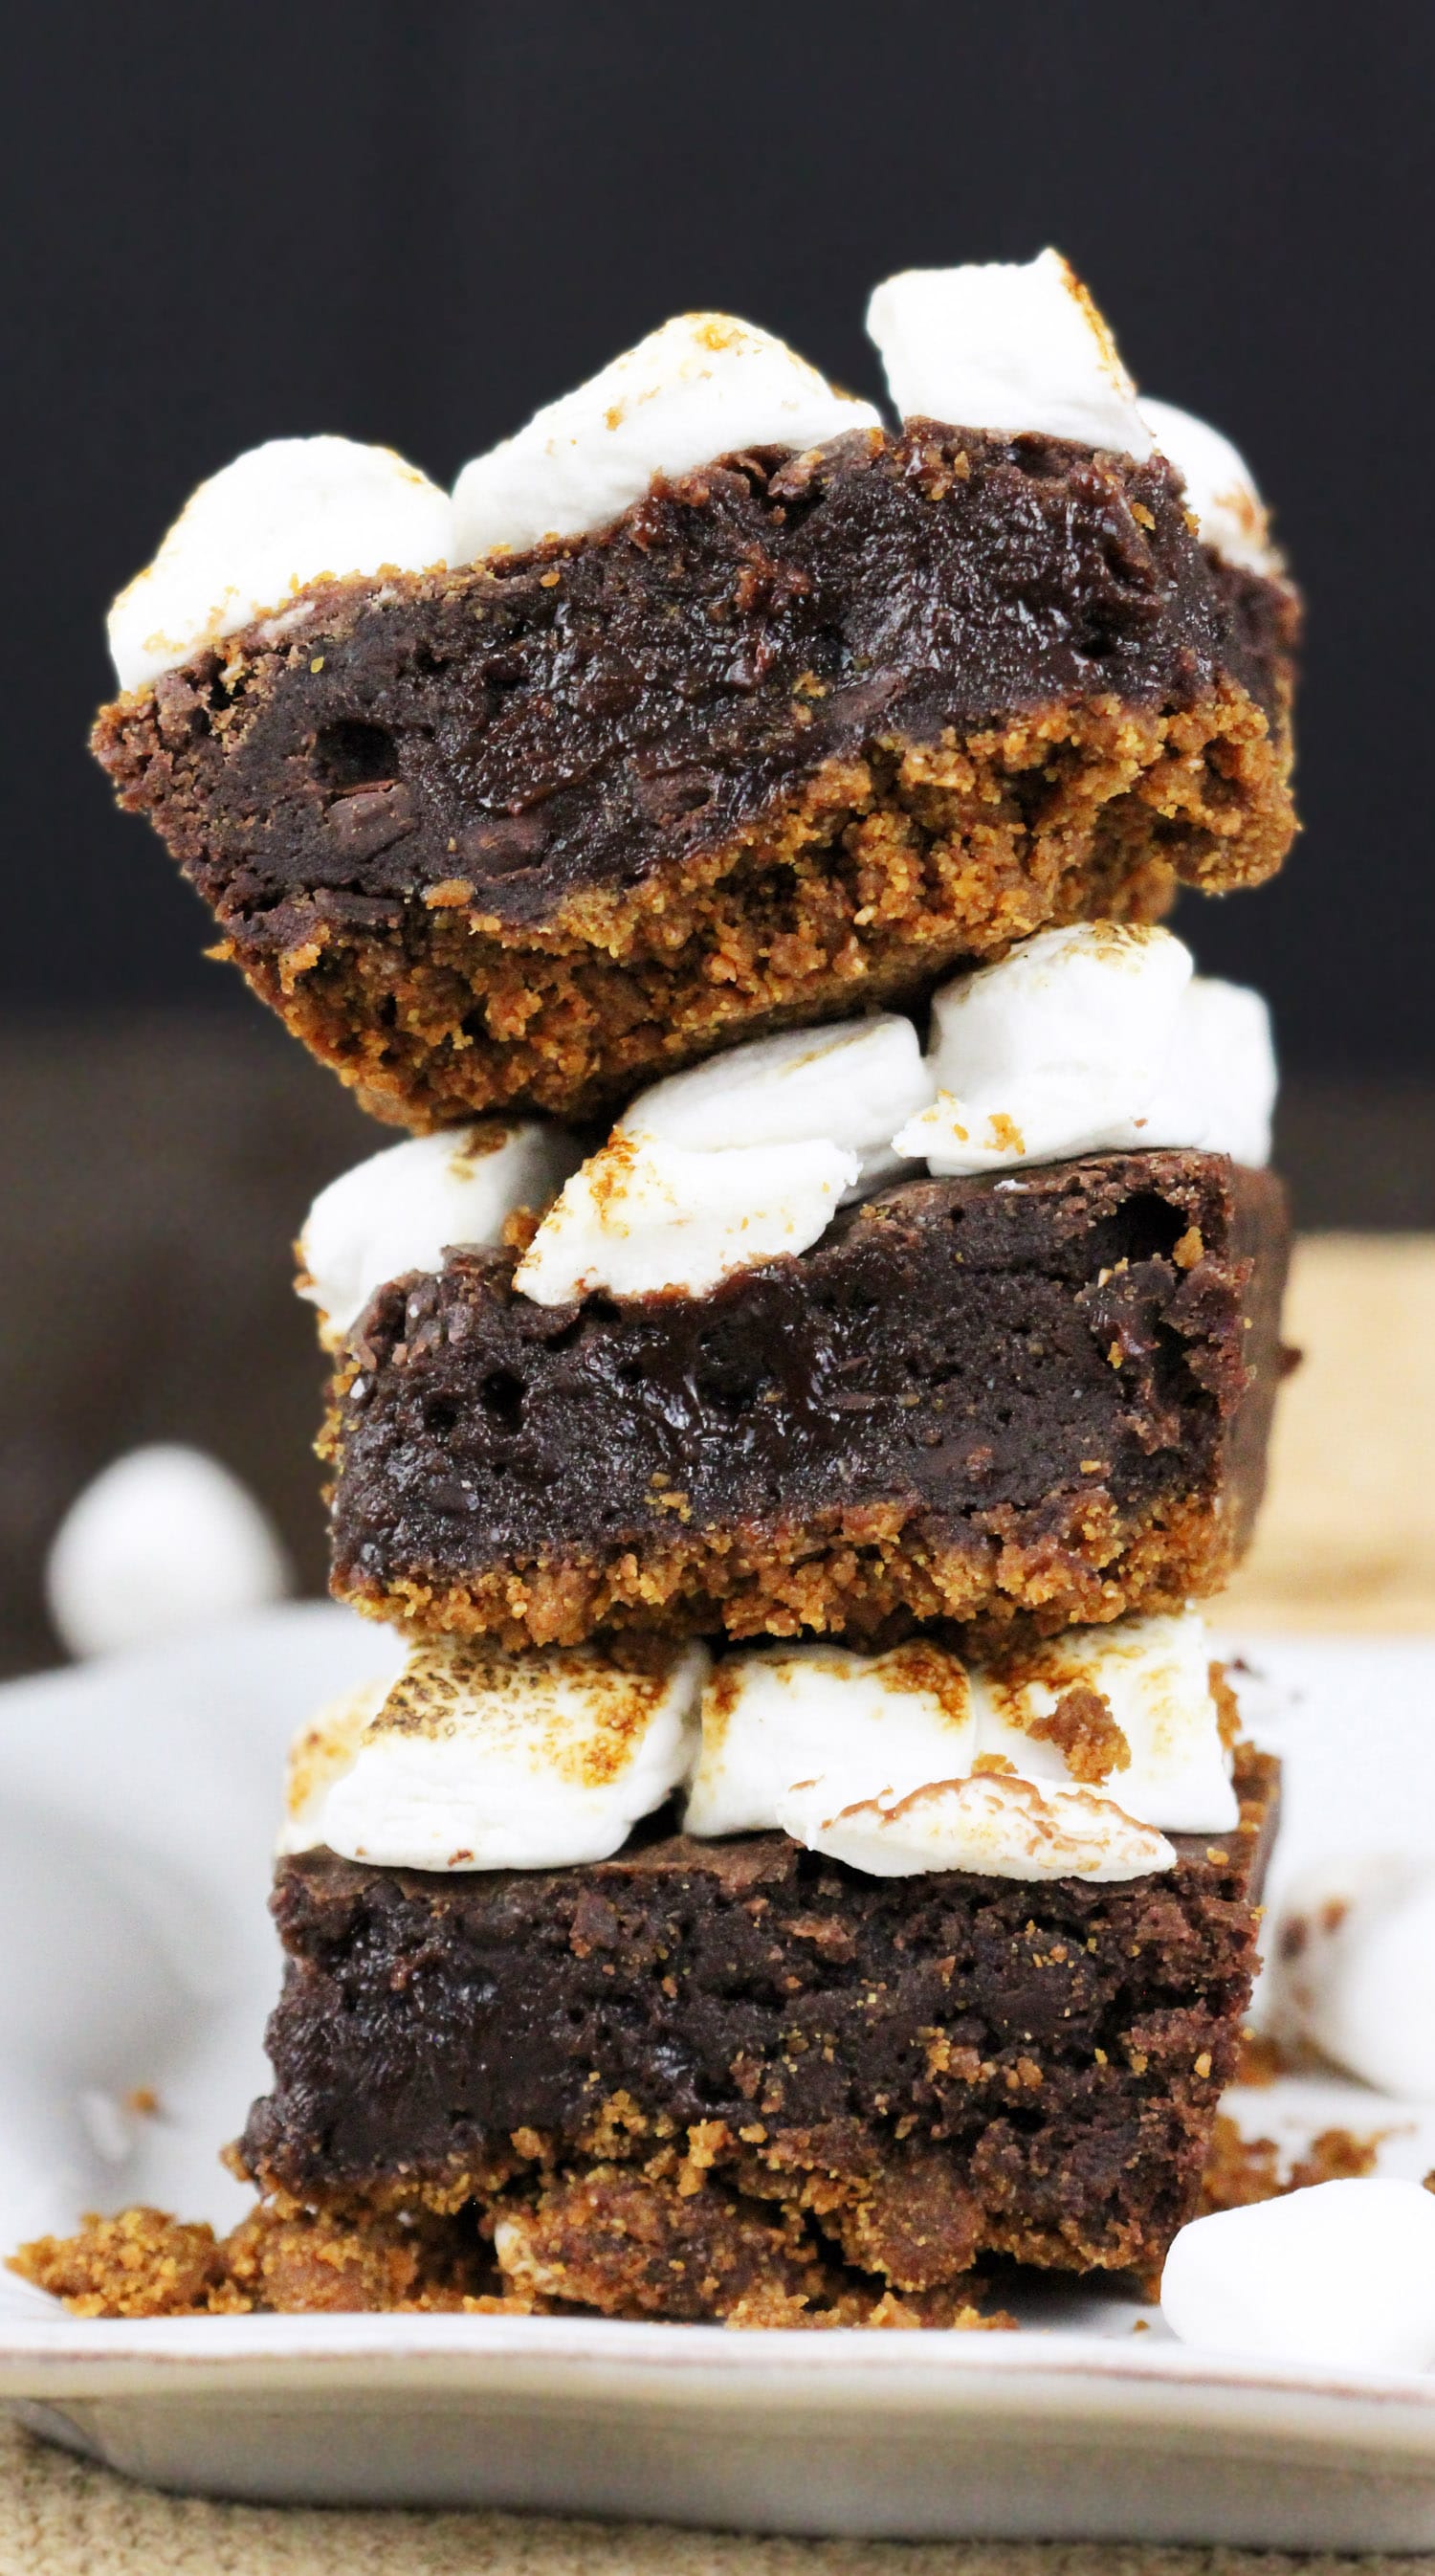 S’mores Brownies with just 6 ingredients! Satisfy your s’mores craving with these delicious brownies. Made with an actual graham cracker crust, fudge brownie filling, and a sweet marshmallow studded topping, every bite is full of salty-sweet graham cracker flavor, decadent chocolate, and toasted mallows. Healthy Dessert Recipes at the Desserts With Benefits Blog (www.DessertsWithBenefits.com)